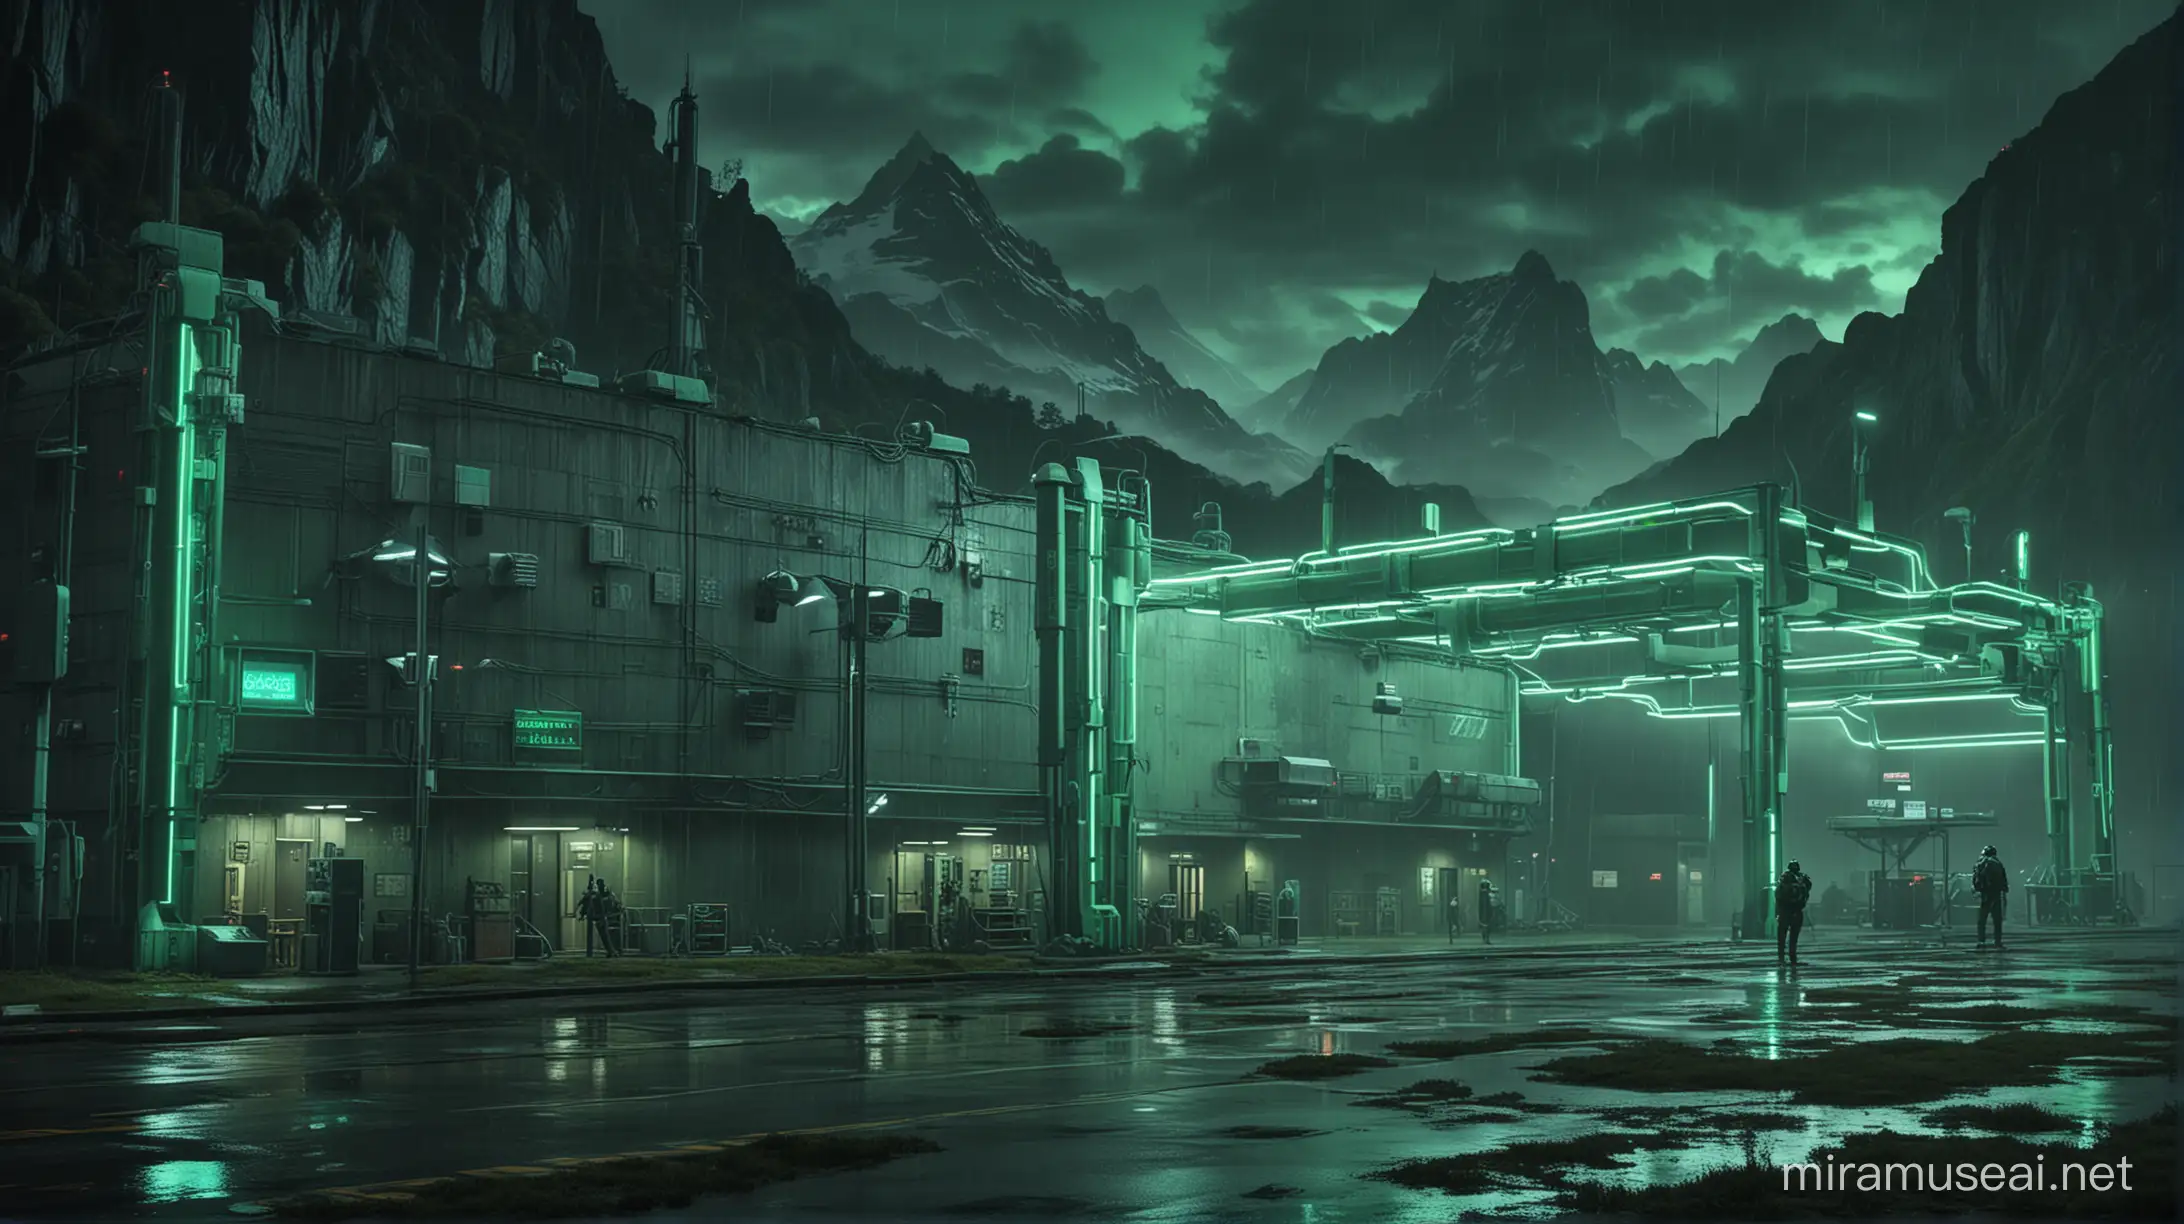 Futuristic Research Center Illuminated by Bright Green Neon Lights in Rainy Atmosphere